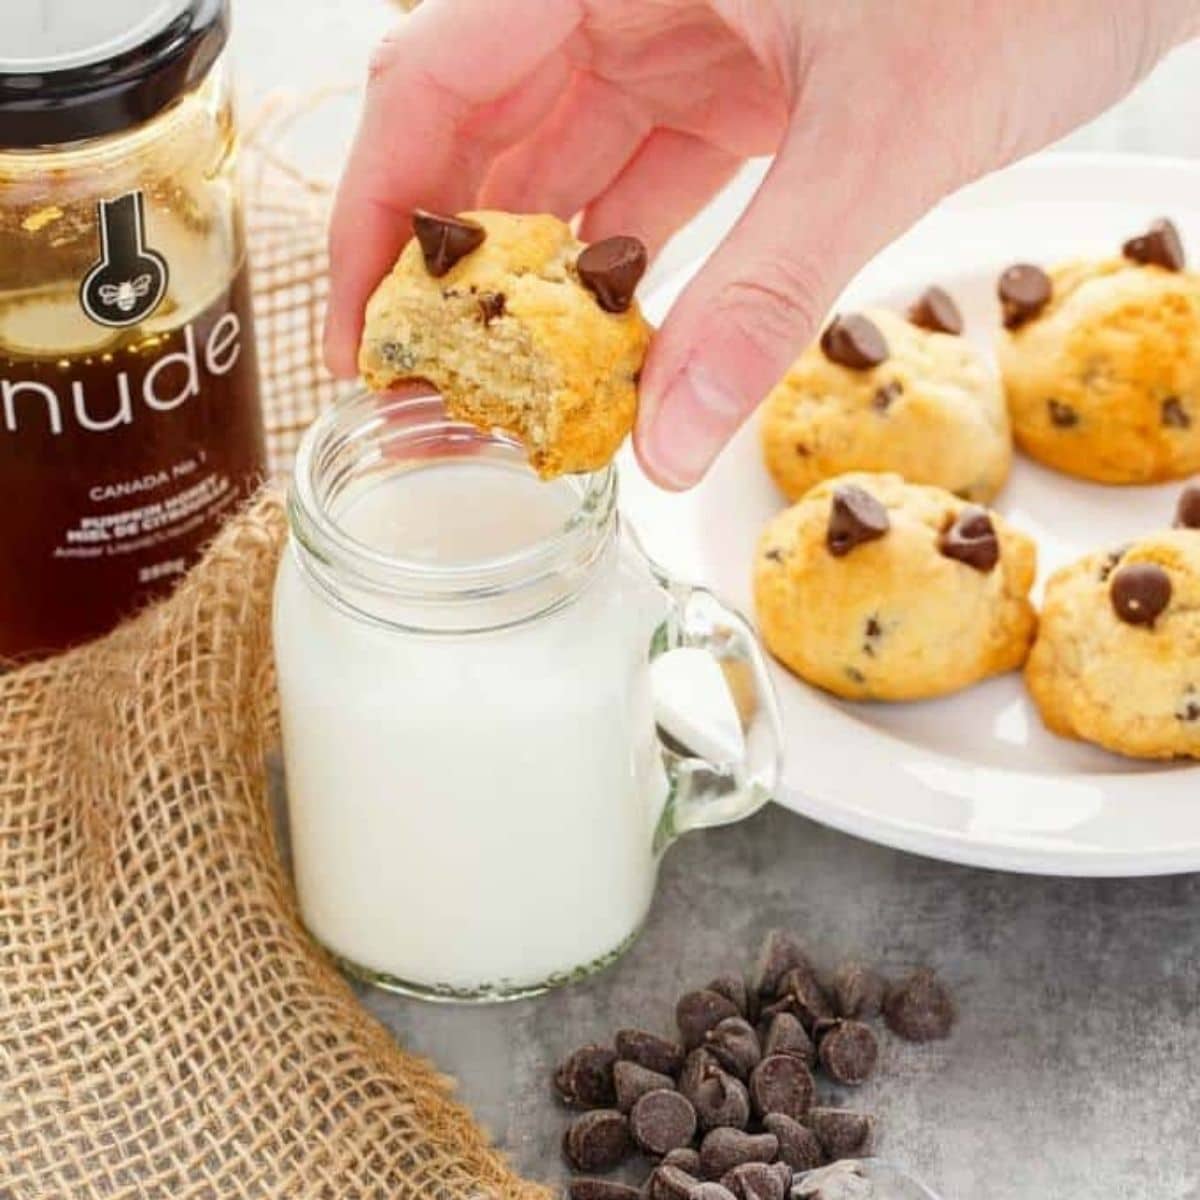 Honey chocolate cip cookes on white platem one cookie held by hand over glass of milk, with chocolate chips and jar of honey on table